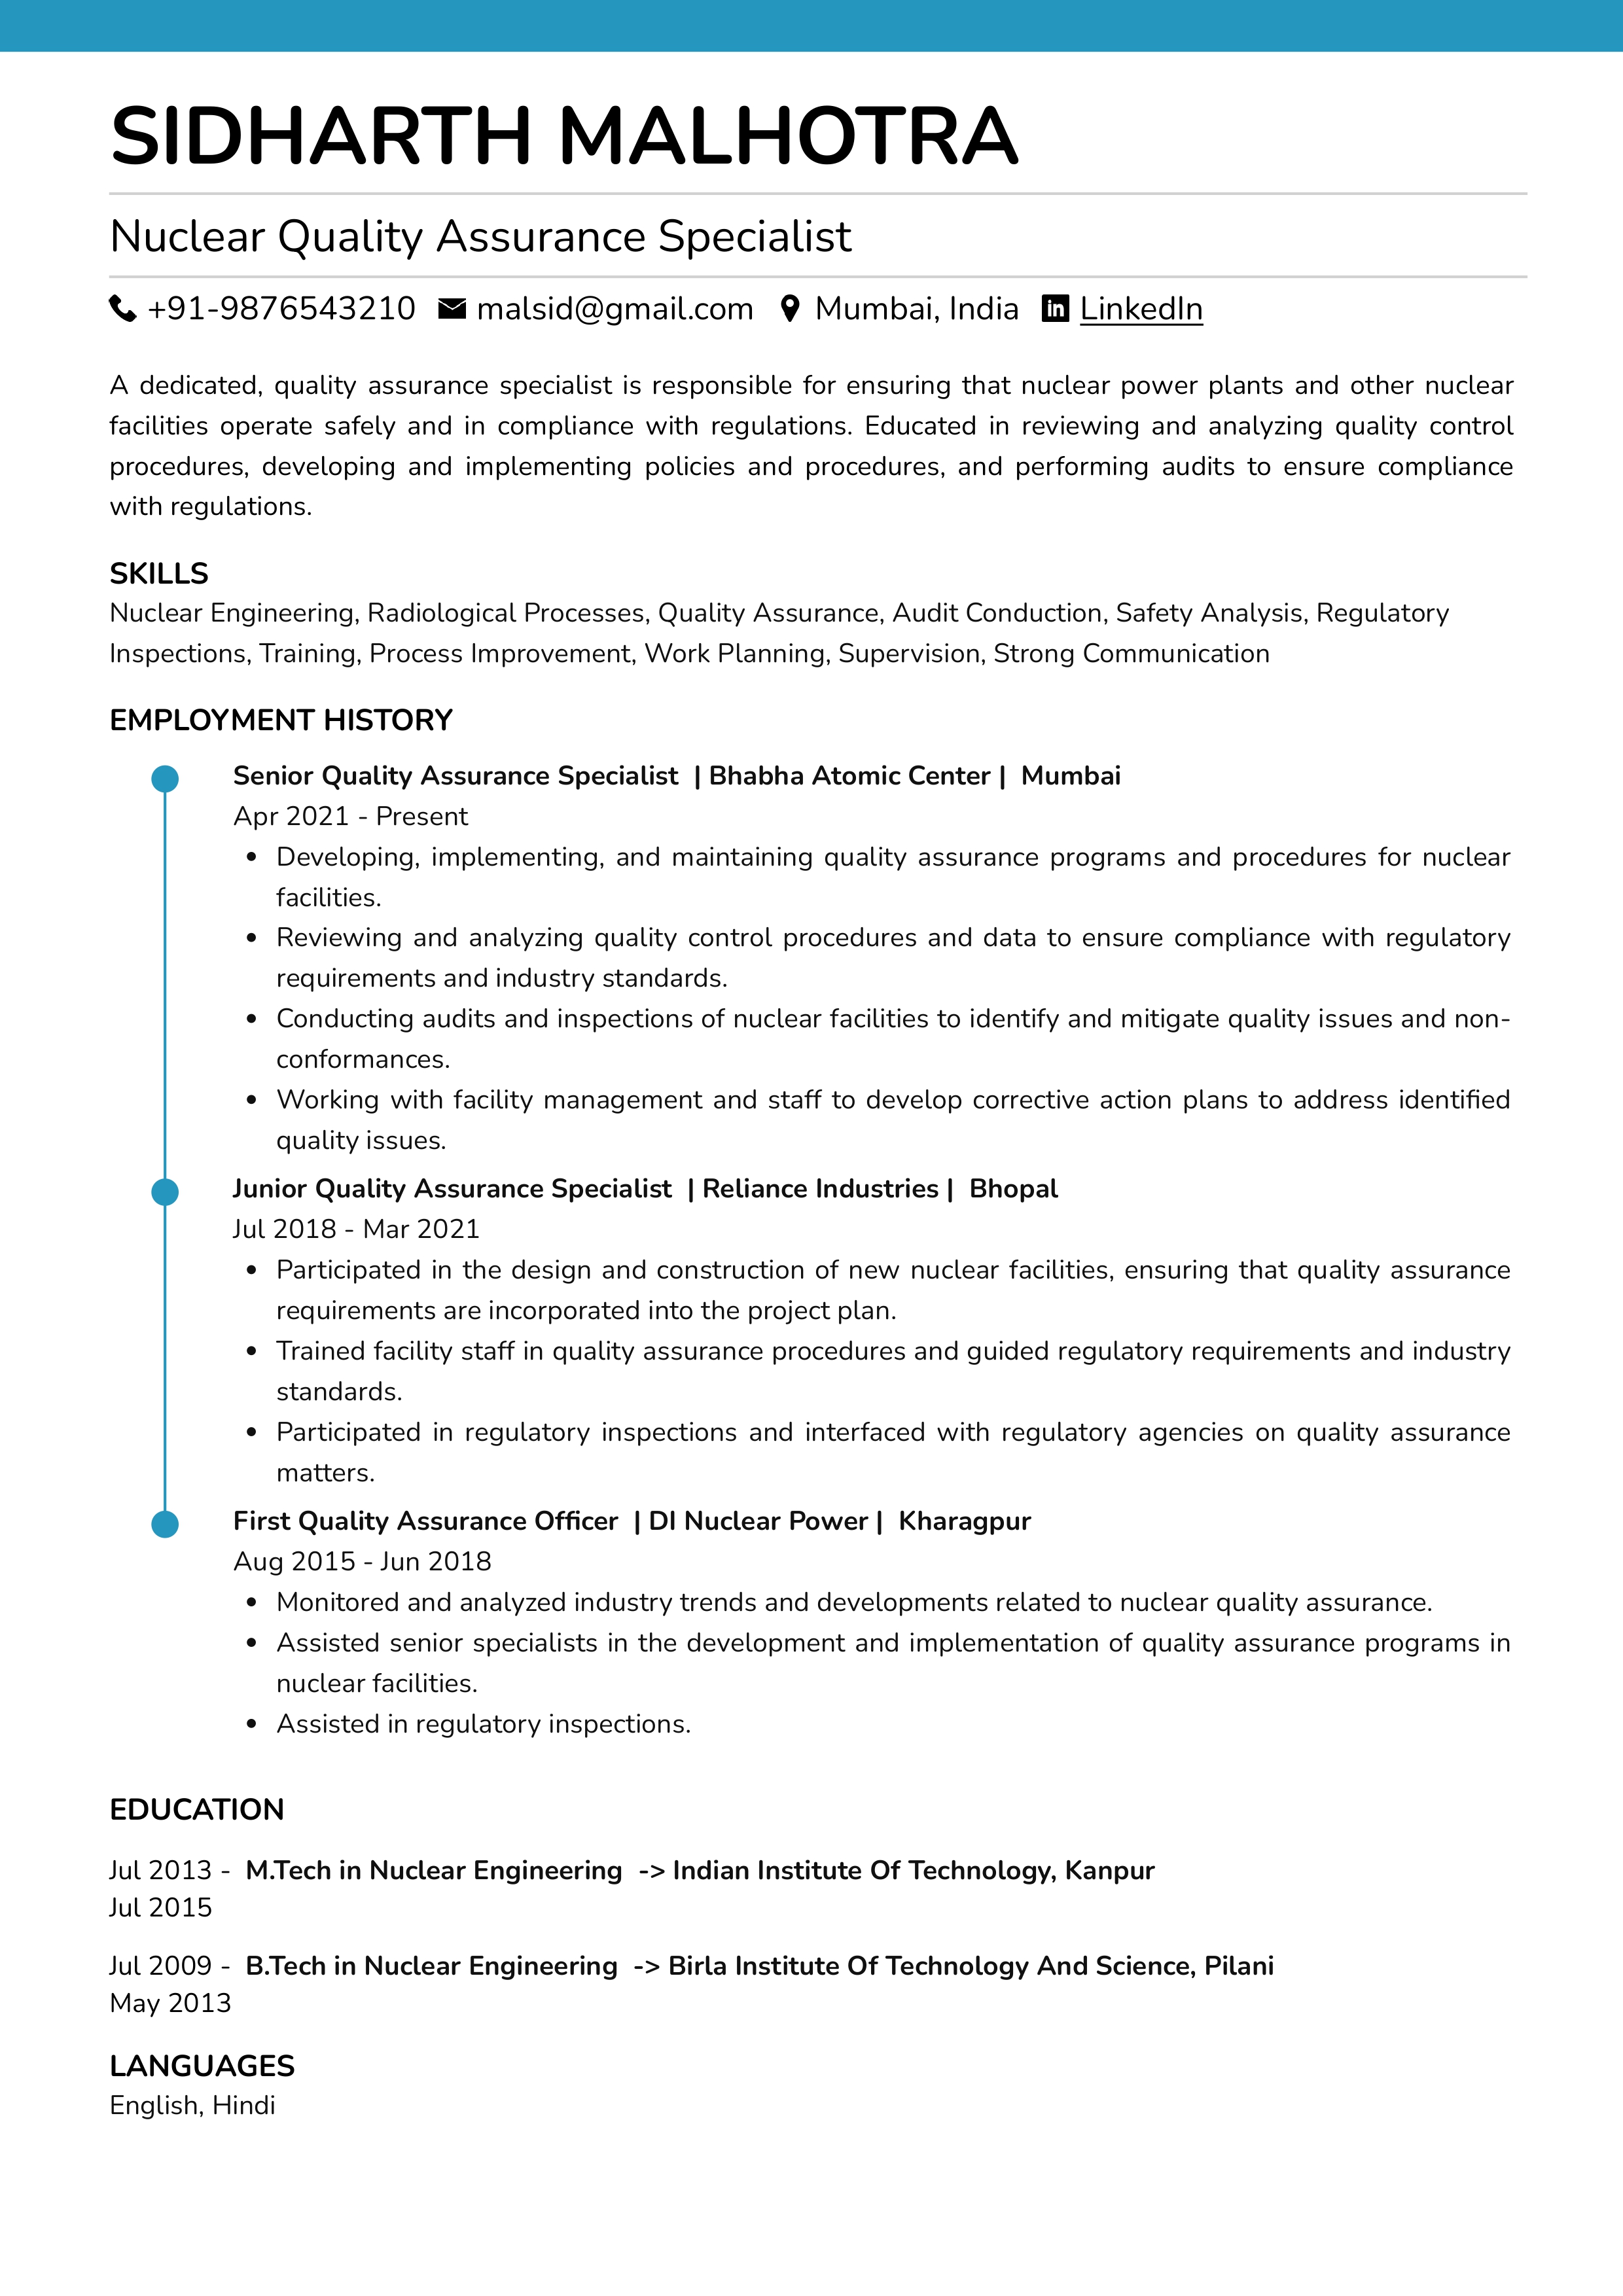 Resume of Nuclear Quality Assurance Specialist